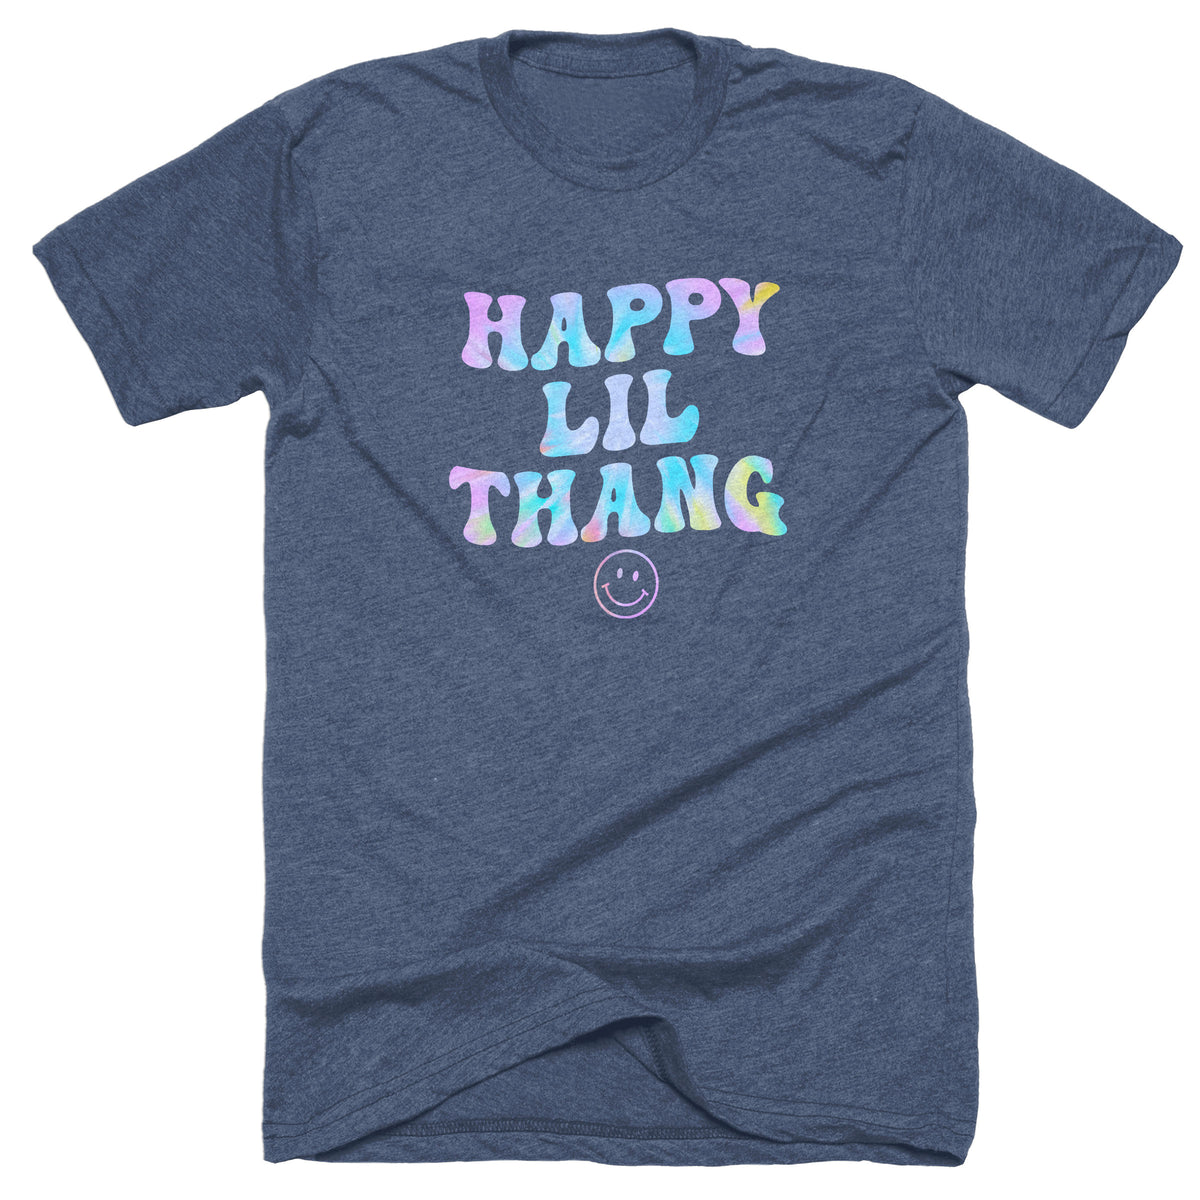 Happy Lil Thang Tee